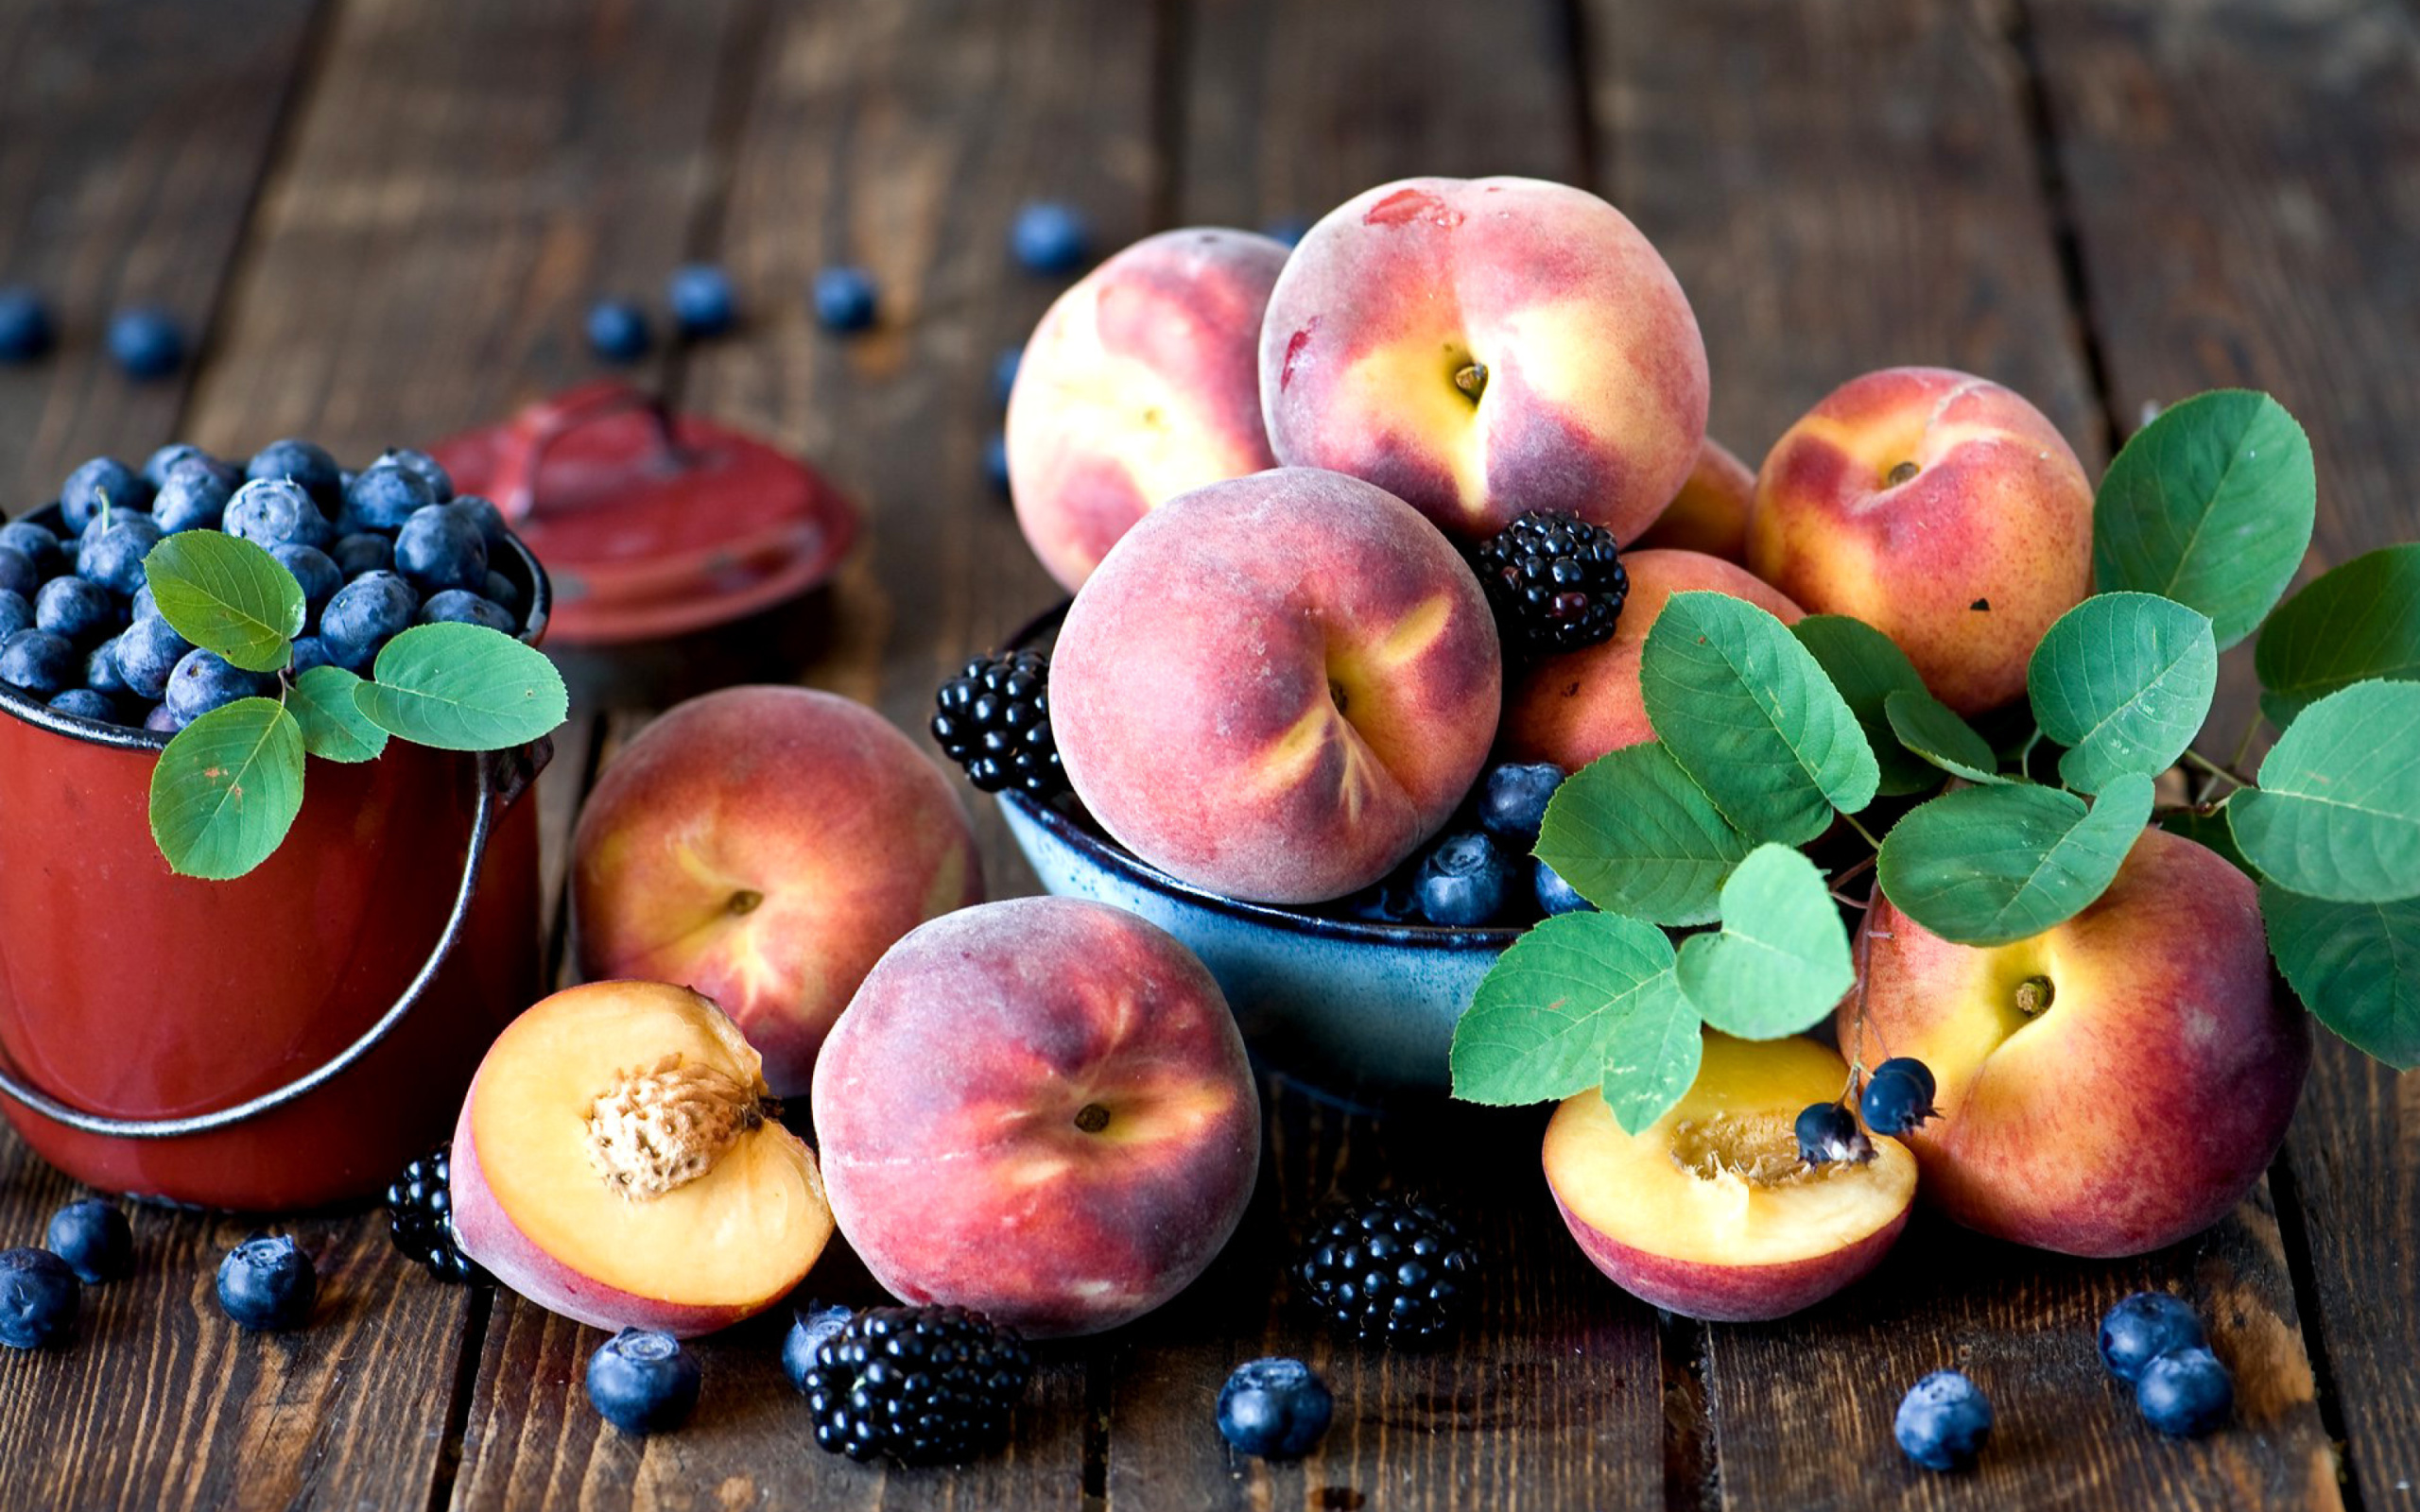 Blueberries and Peaches wallpaper 2560x1600